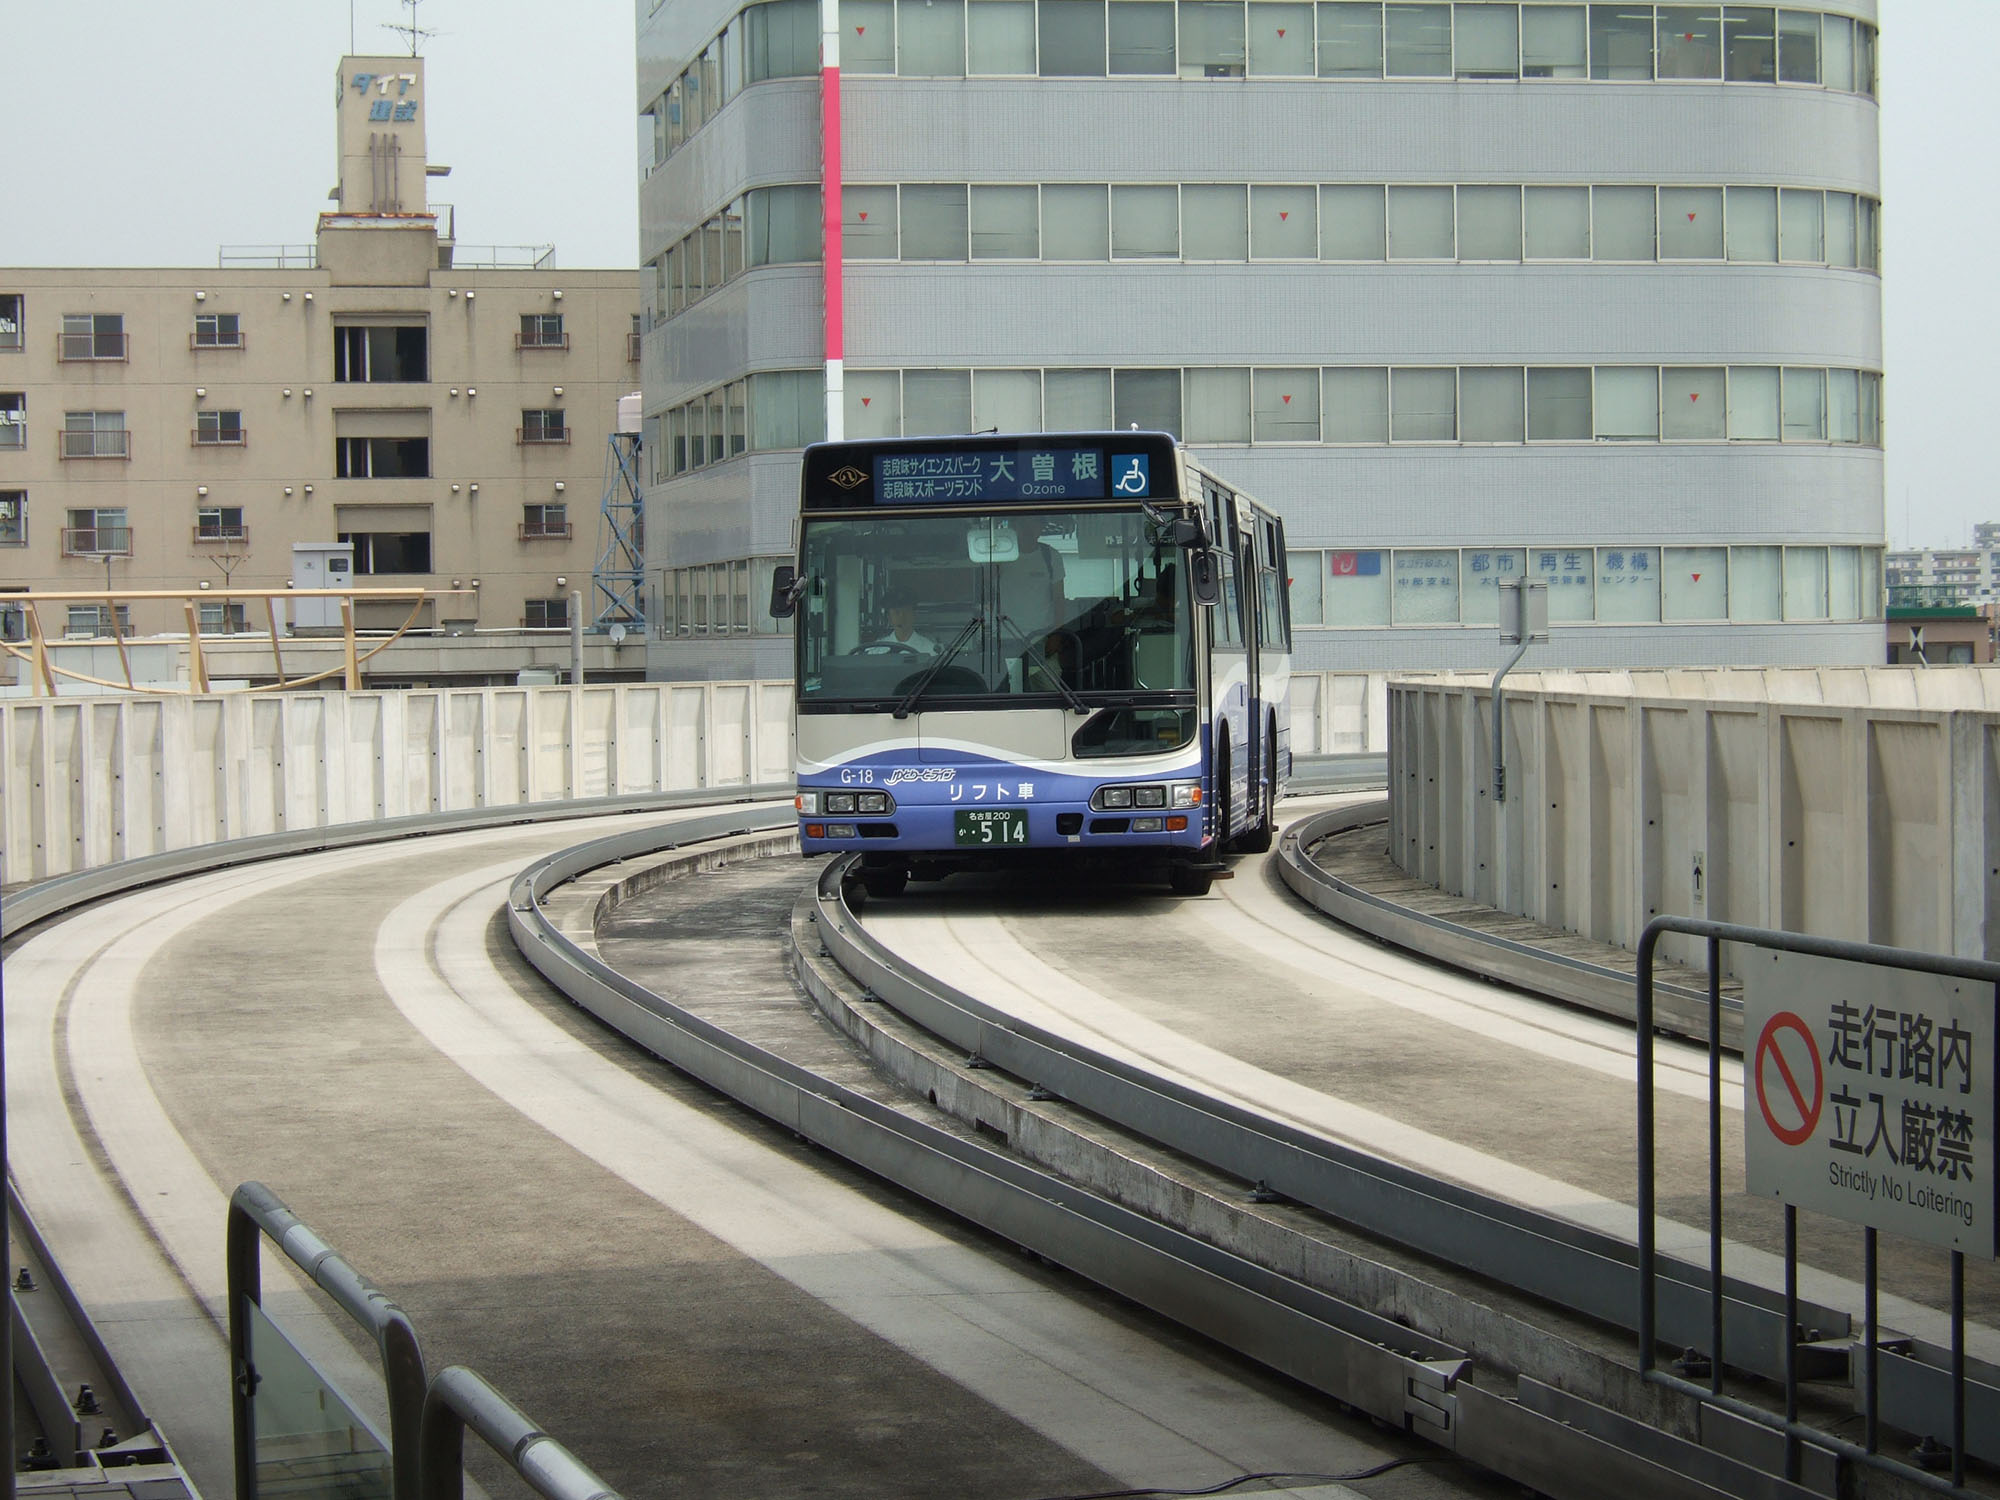 Fig. 22.27 Nagoya, Japan’s elevated BRT line utilizes a mechanical guidance system to reduce the required roadway width.